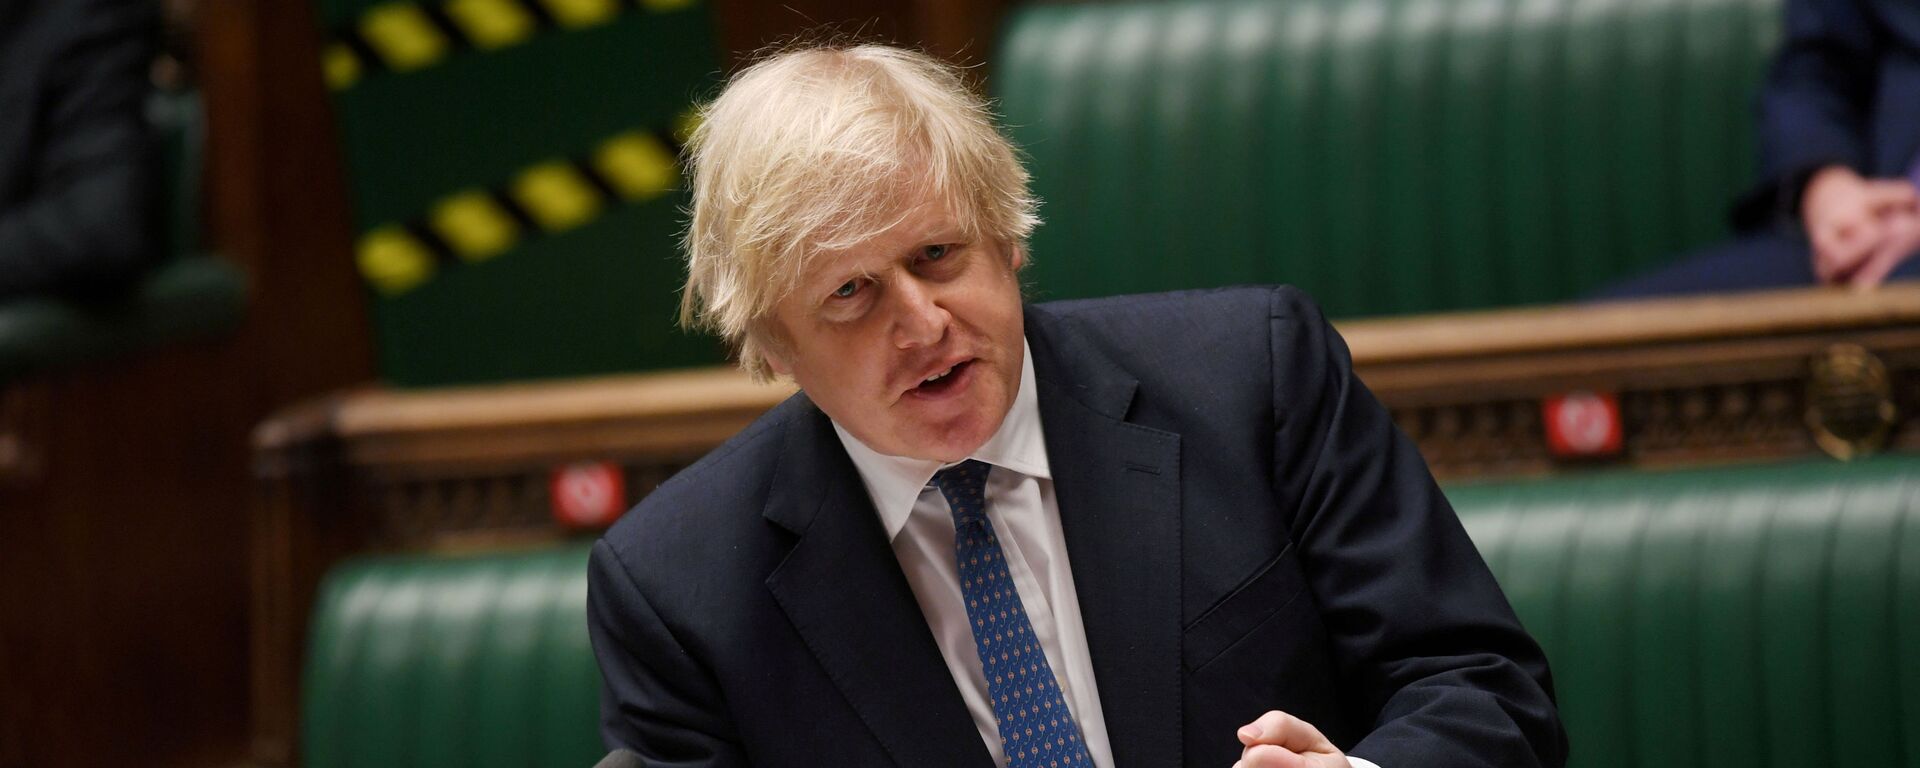 British Prime Minister Boris Johnson speaks during the weekly question time debate at the House of Commons in London, Britain, March 10, 2021 - Sputnik International, 1920, 24.04.2021